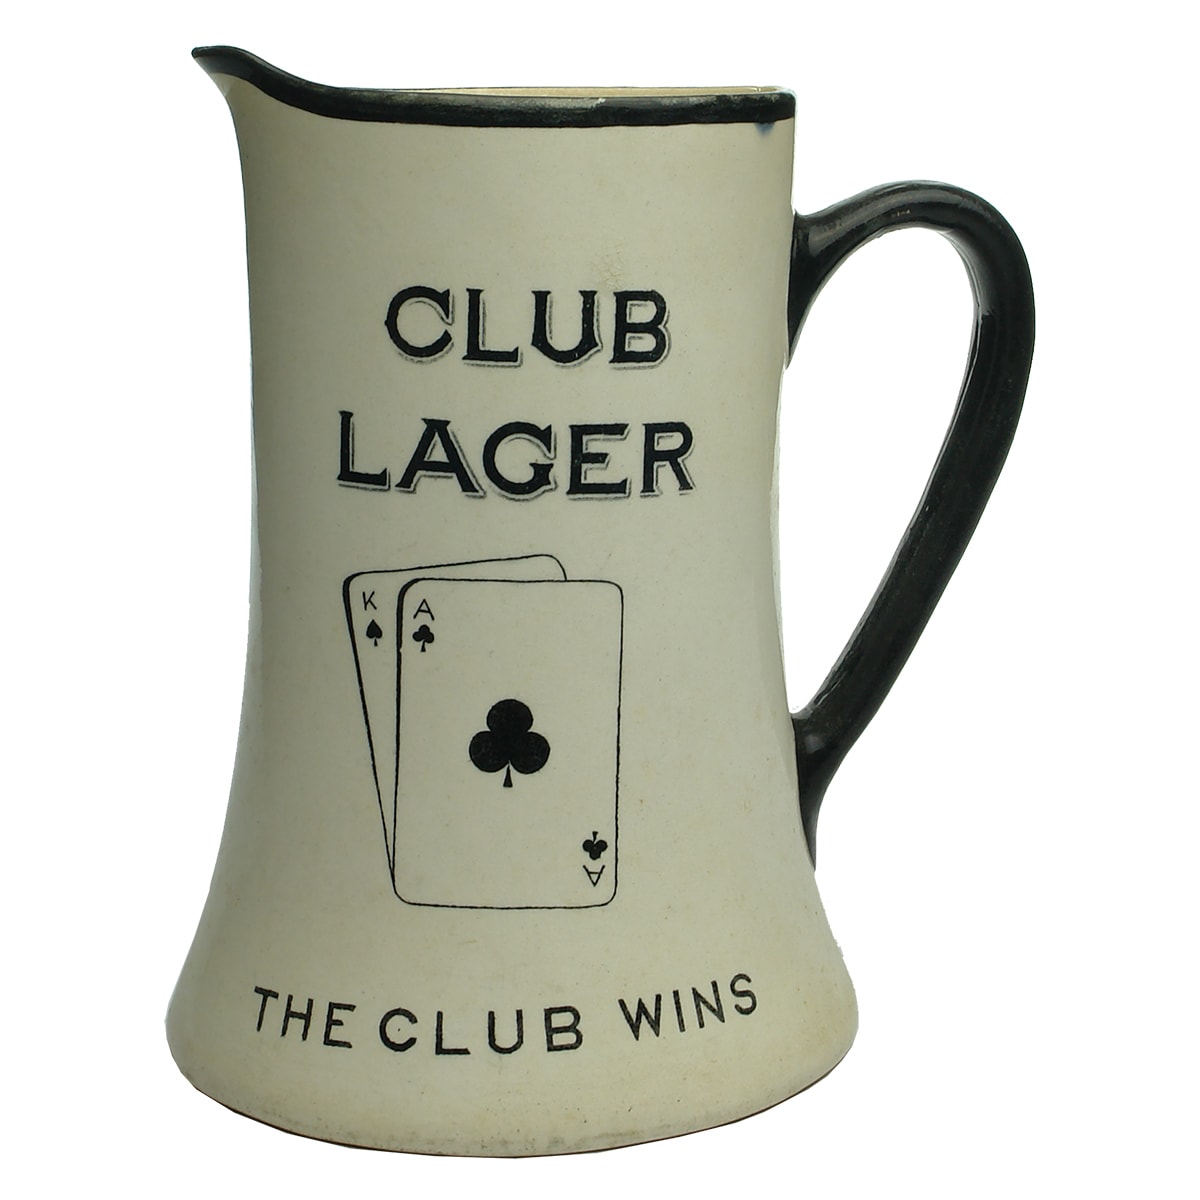 Water Jug. Club Lager. (Tooheys Sydney). Calyx Pottery, Perth. (New South Wales)